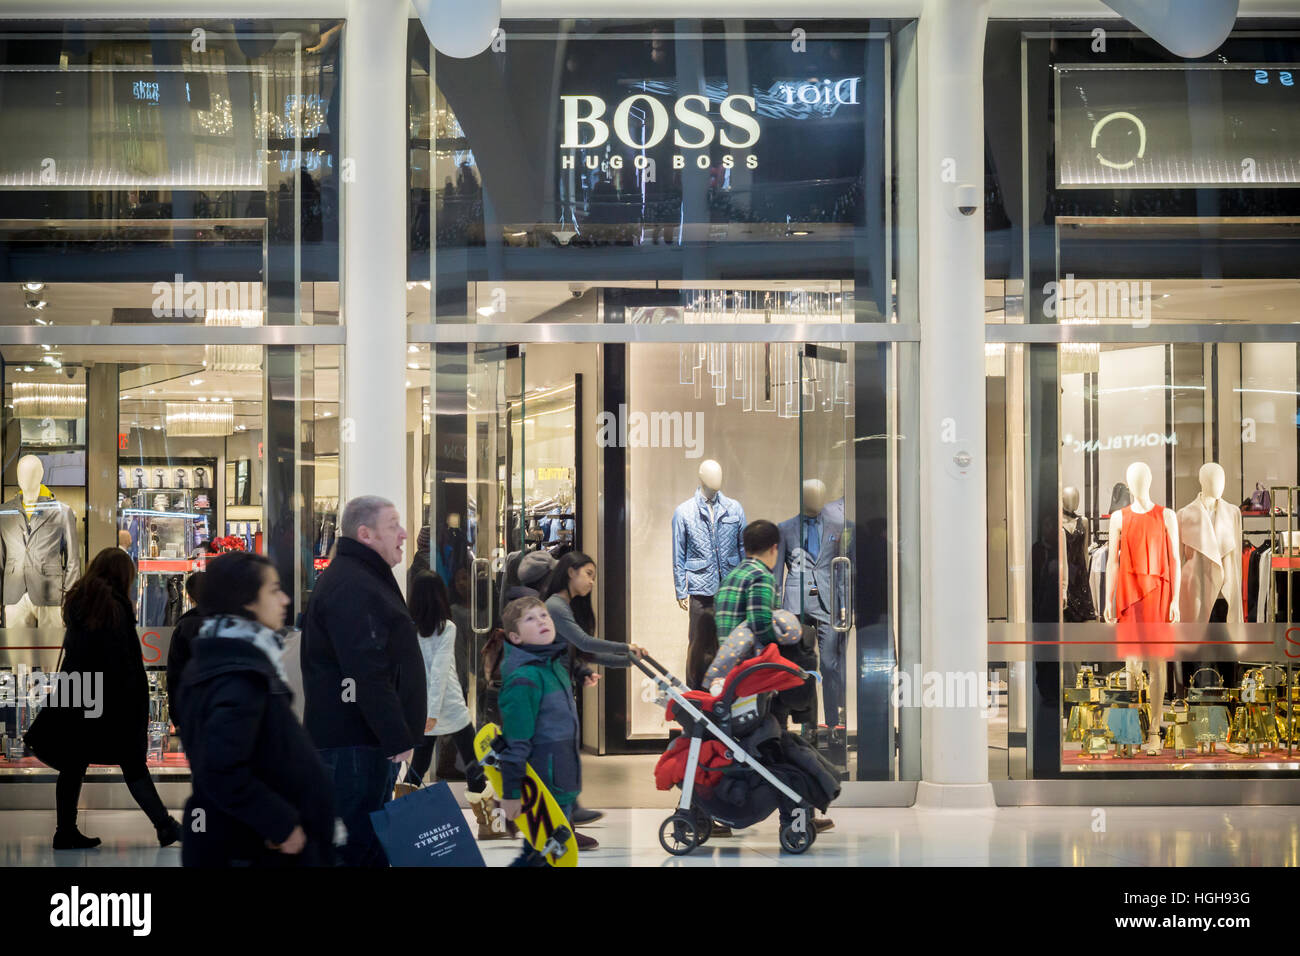 Hugo Boss Westfield High Resolution Stock Photography and Images - Alamy